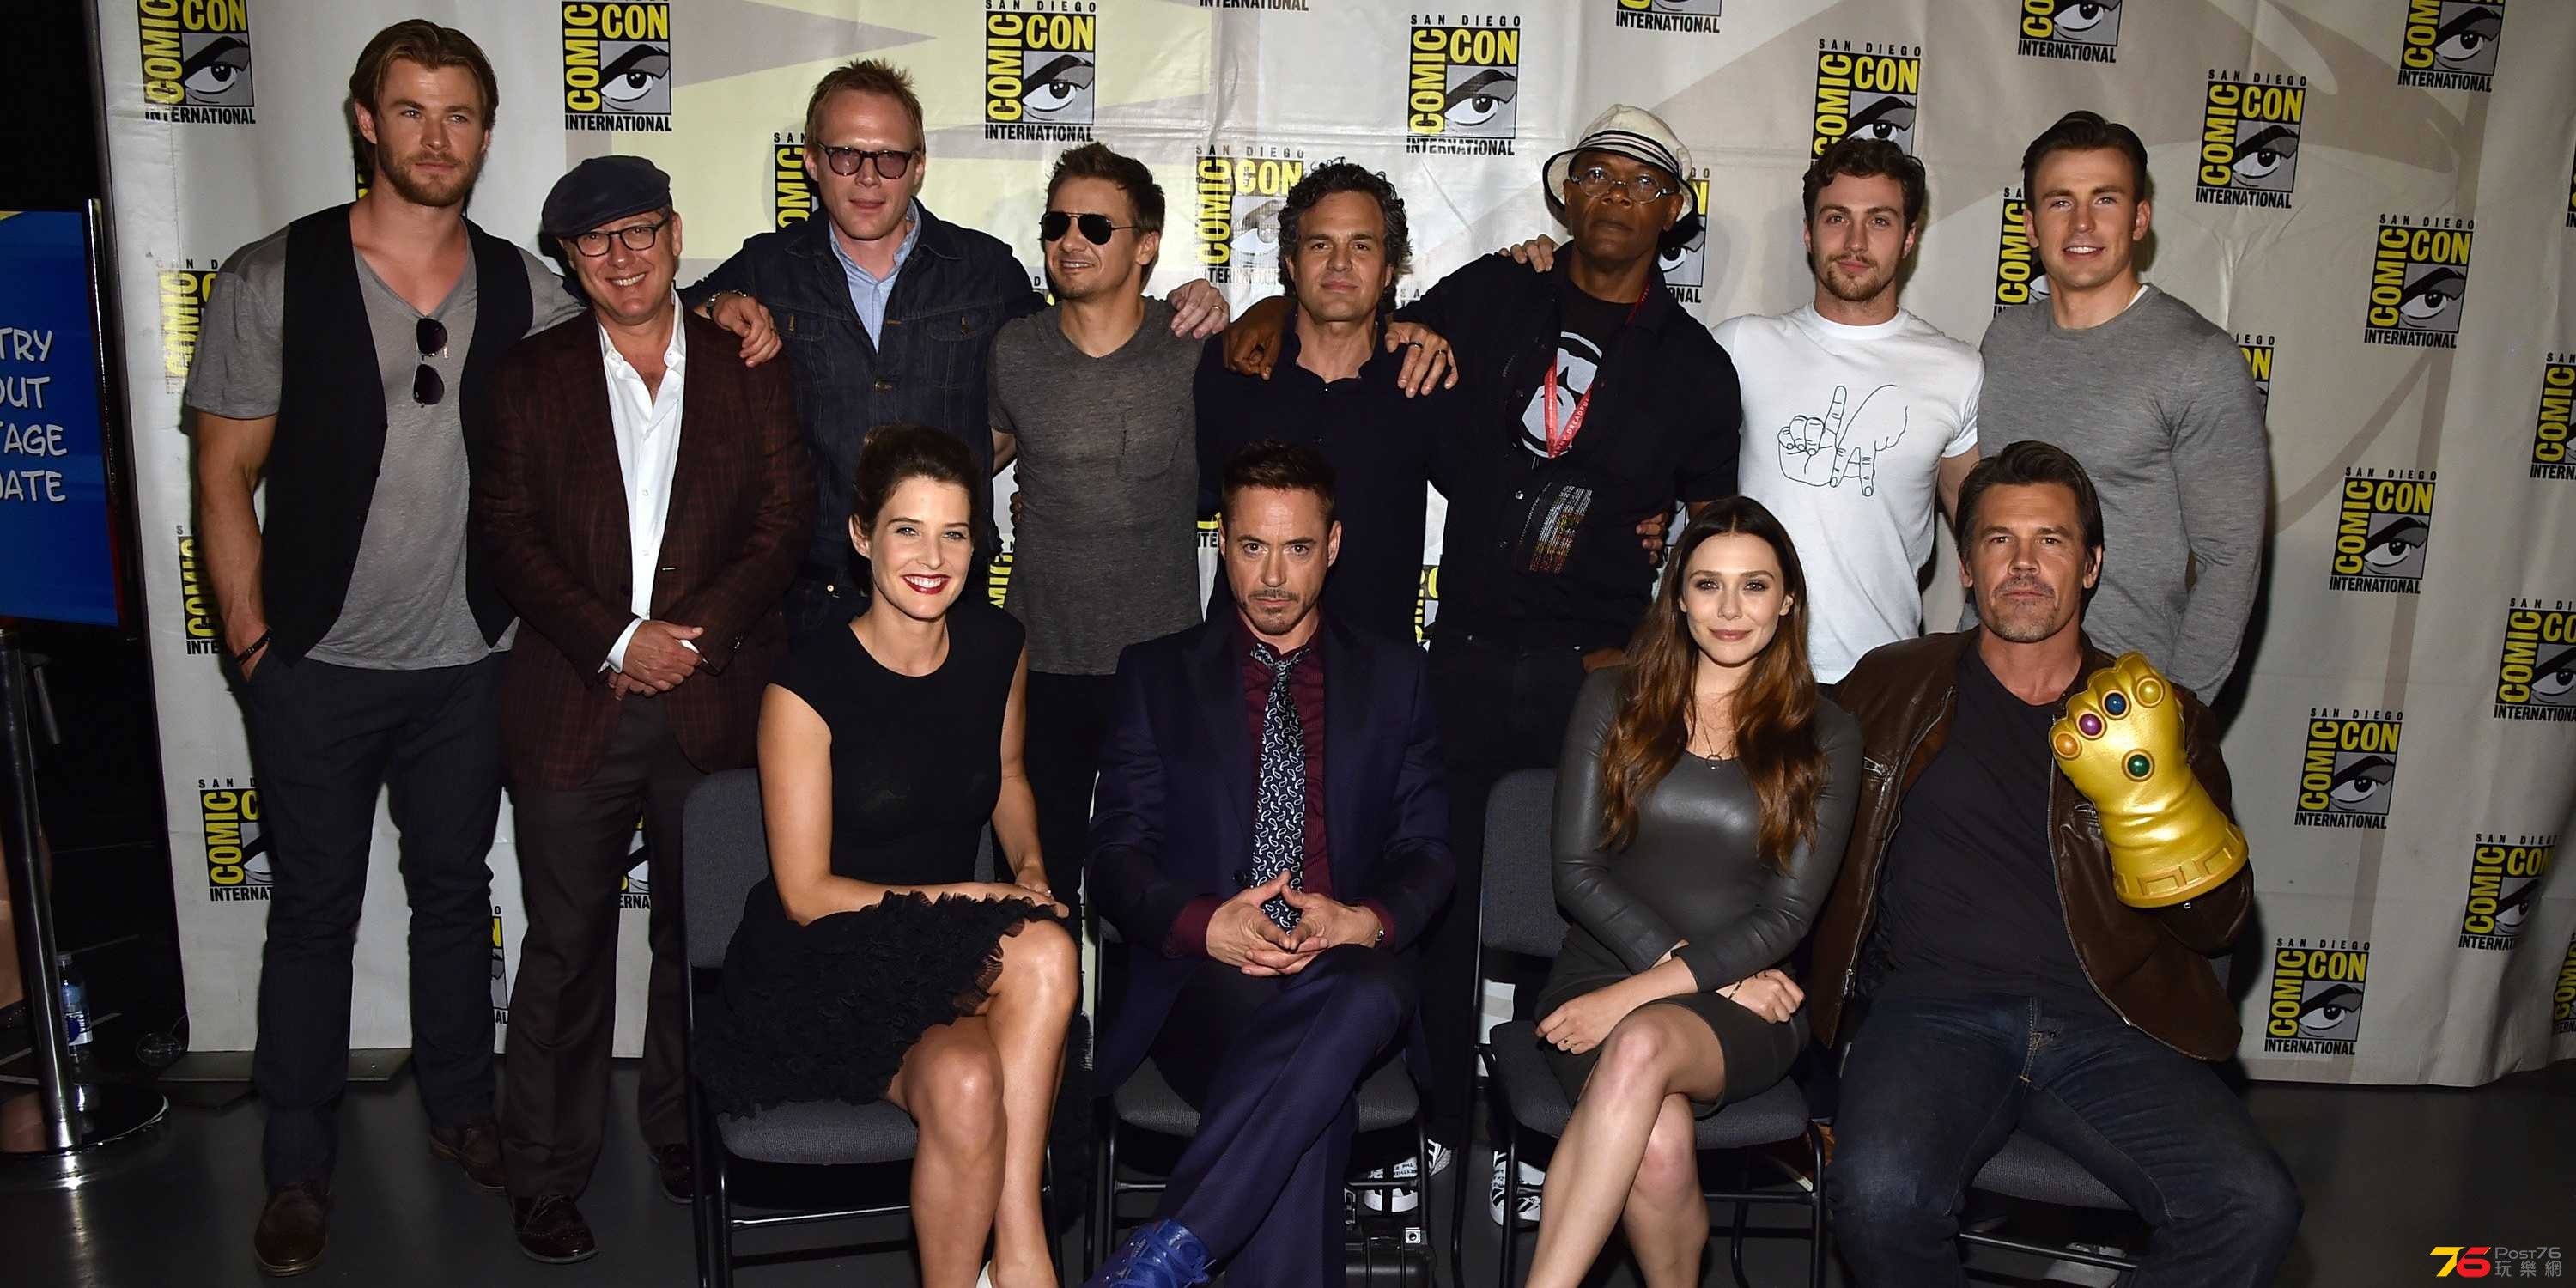 8-things-we-learned-about-avengers-age-of-ultron-at-comic-con.jpg